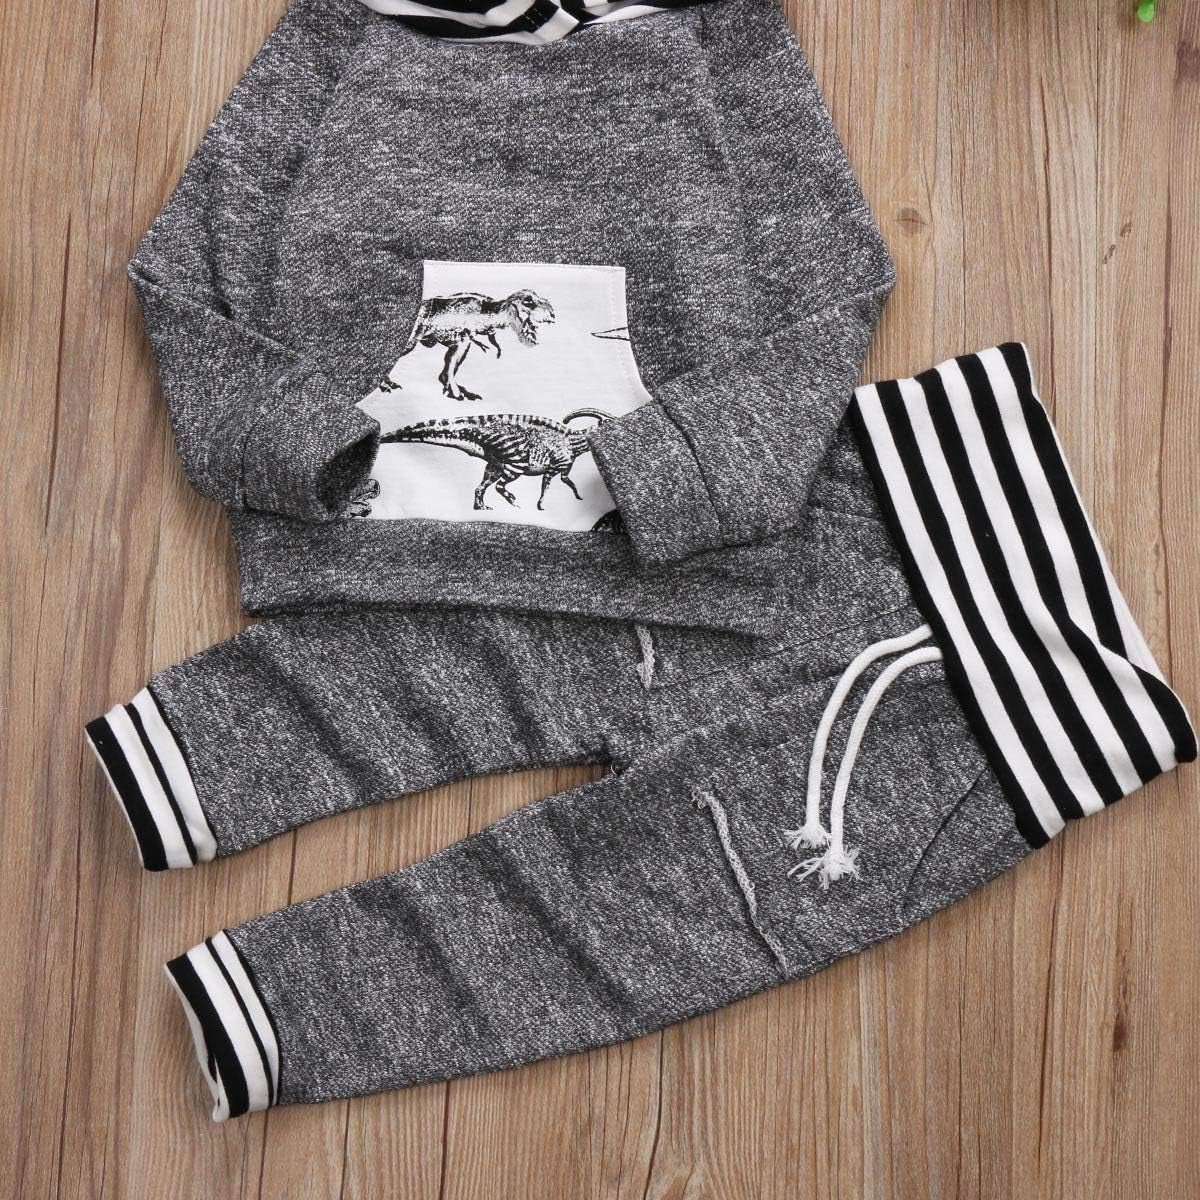 Toddler Infant Baby Boy Clothes Hoodie Fall Winter Sweatsuit Pants Gender Neutral Long Sleeve Outfit Set